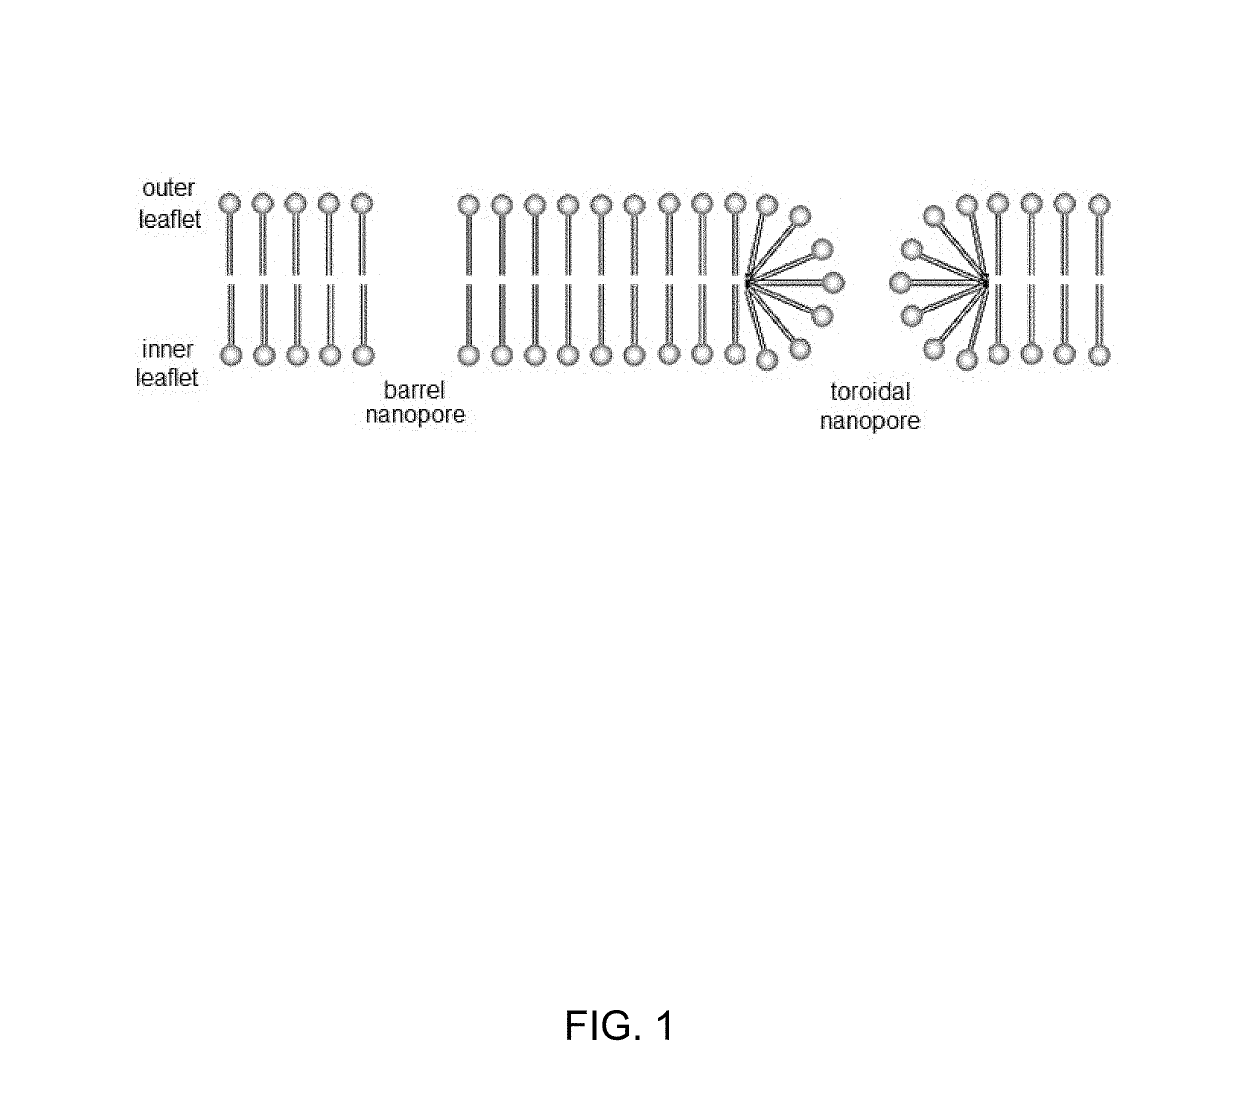 Nucleic Acid and Other Compositions and Methods for the Modulation of Cell Membranes